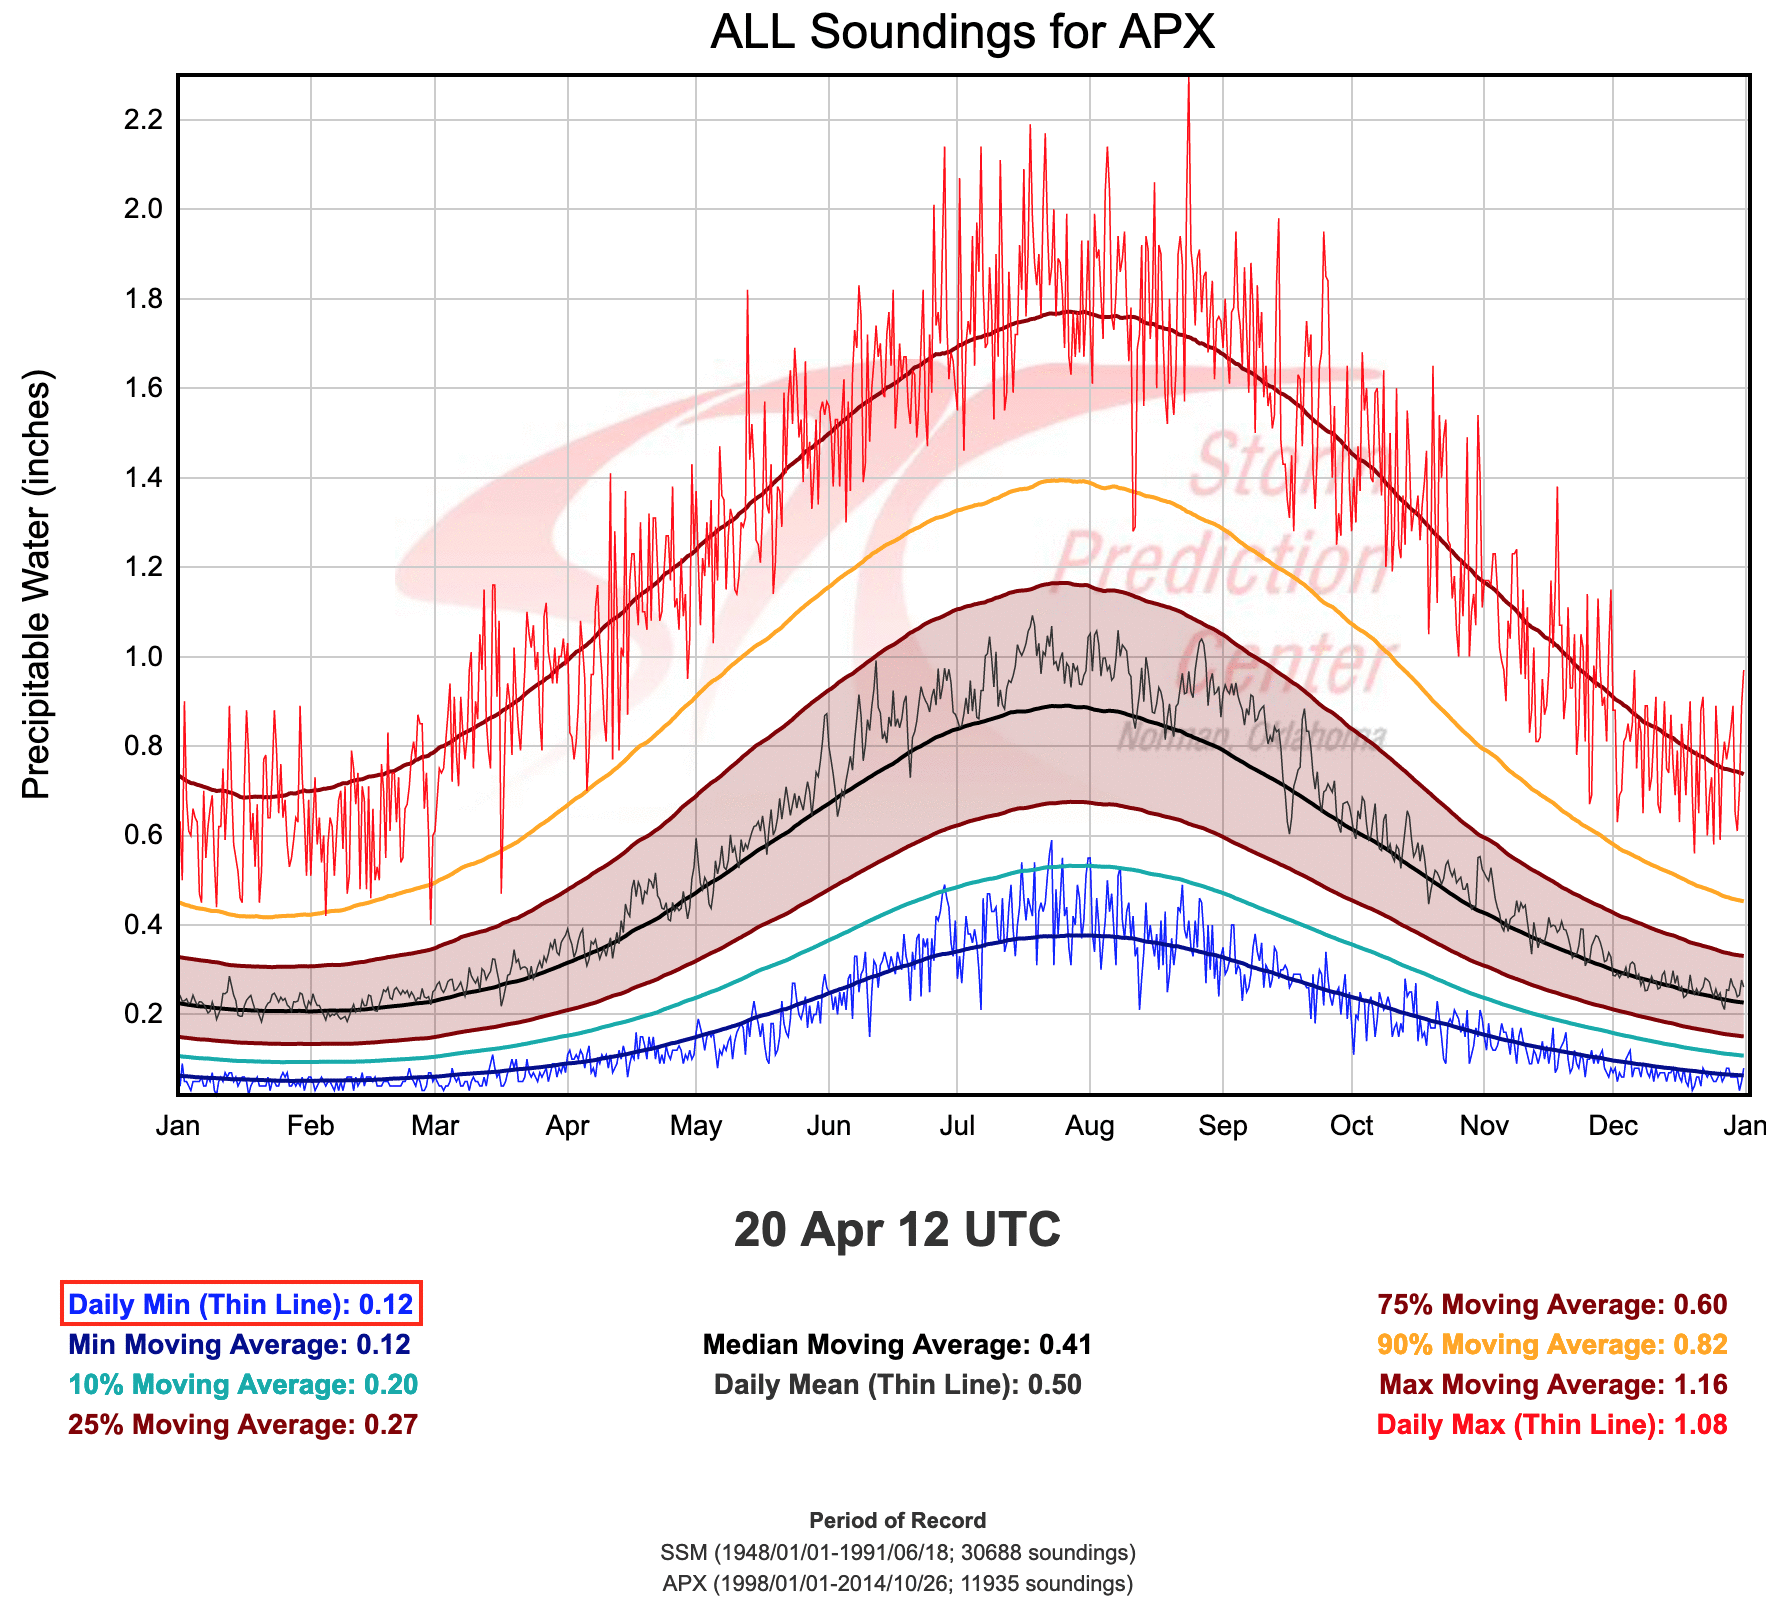 Plots of Total Precipitable Water sounding climatology for Gaylord, Michigan (KAPX) and Lincoln, Illinois (KILX), with record minimum values for 20 April at 12 UTC highlighted within a red box [click to enlarge]